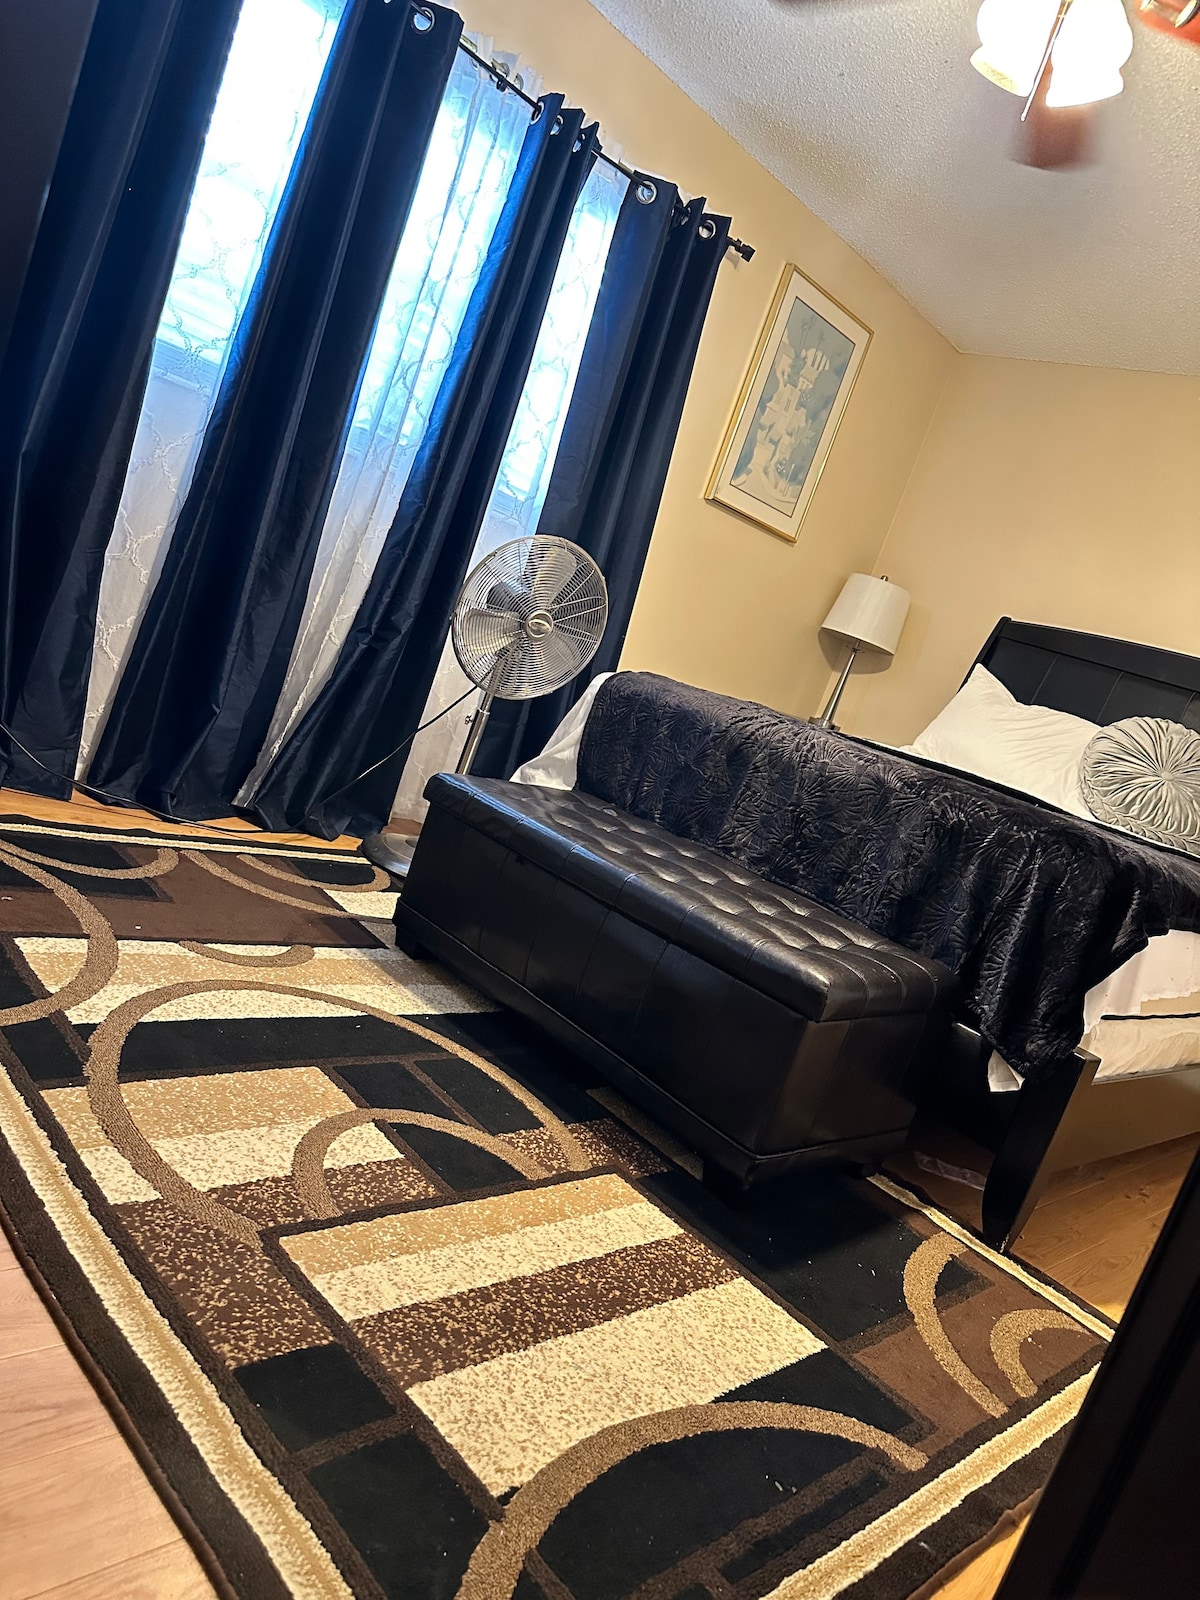 Private Bed/bath .10 from Airport /free parking